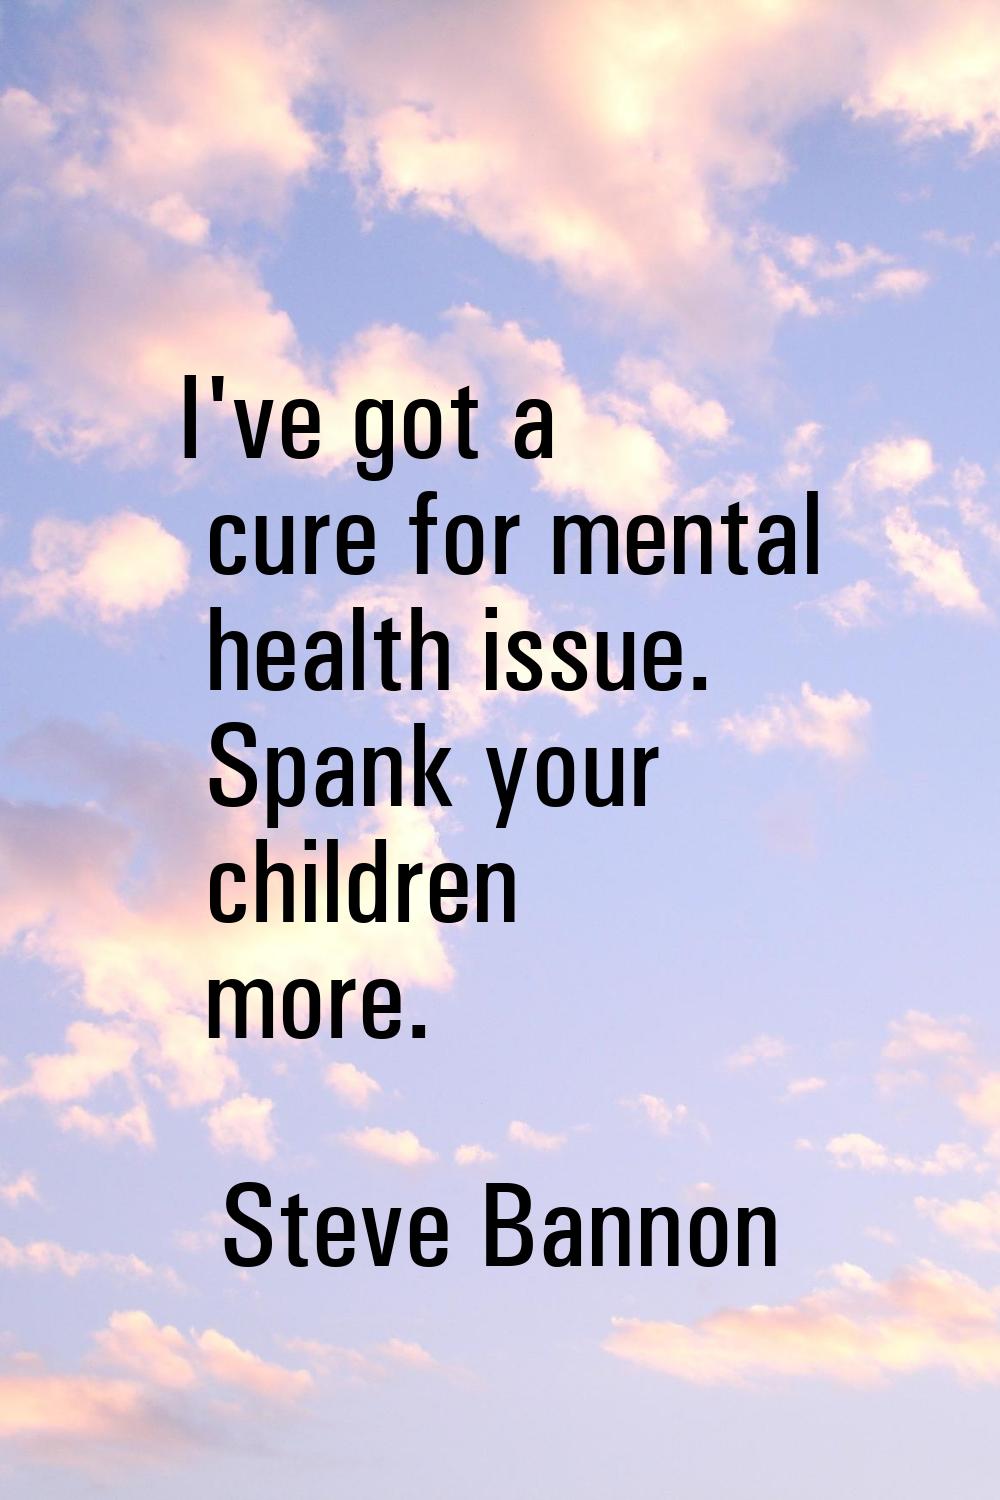 I've got a cure for mental health issue. Spank your children more.